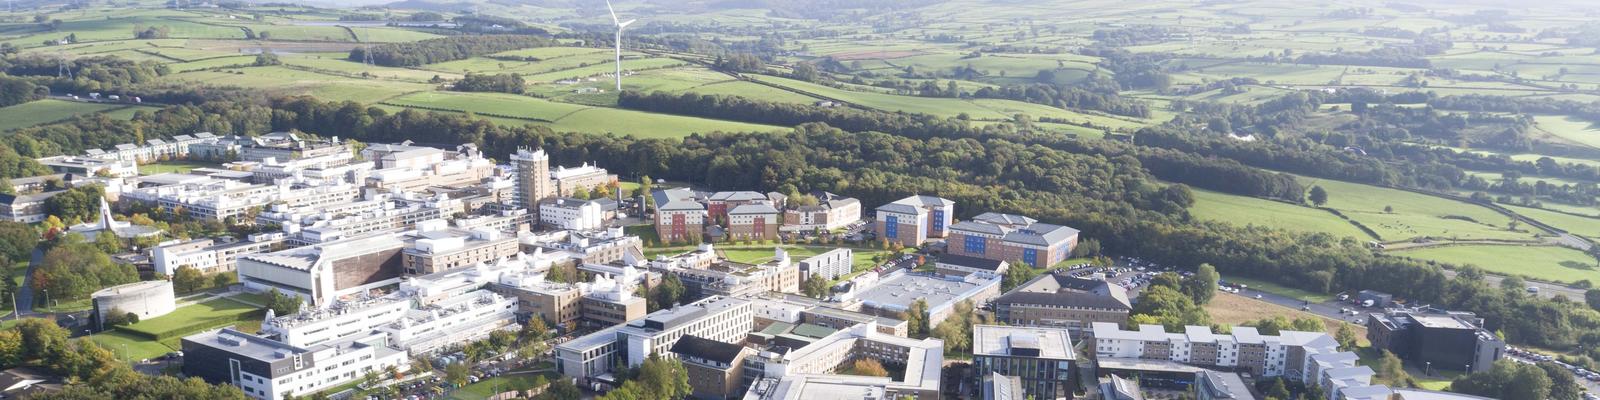 Lancaster University campus from the air